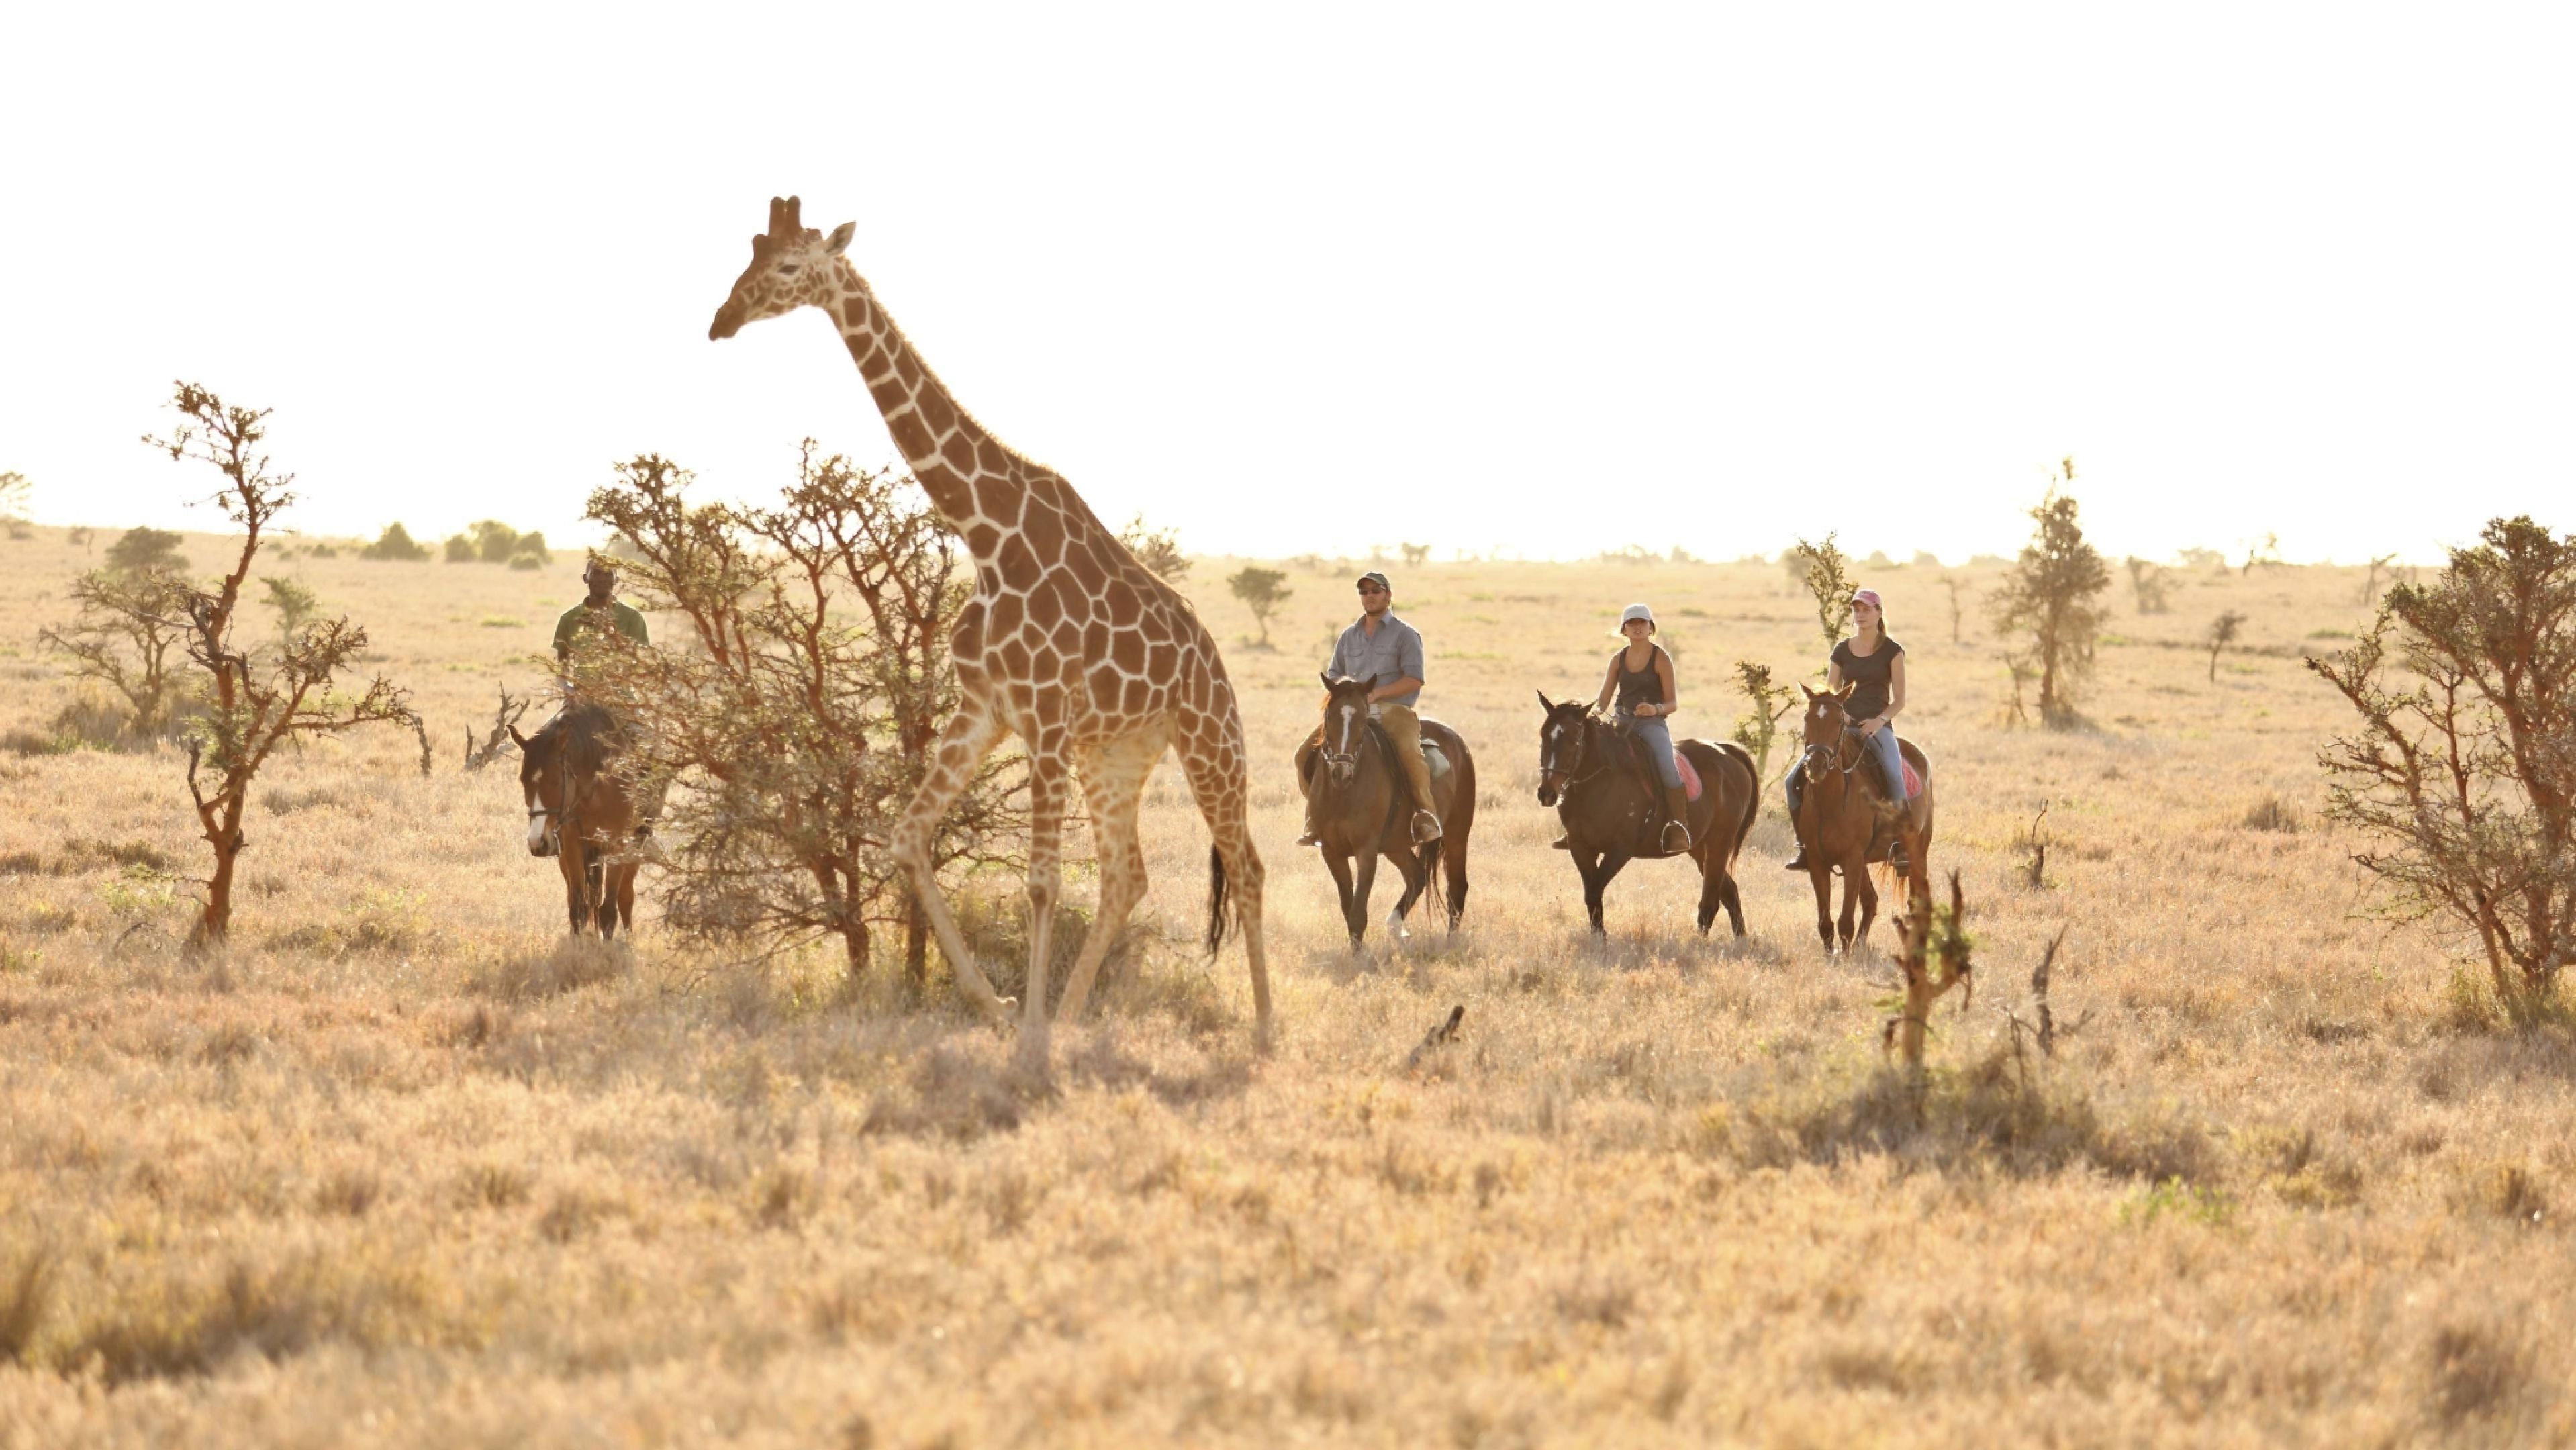 Giraffe surrounded by people on horses in the Lewa Wilderness in Laikpia.